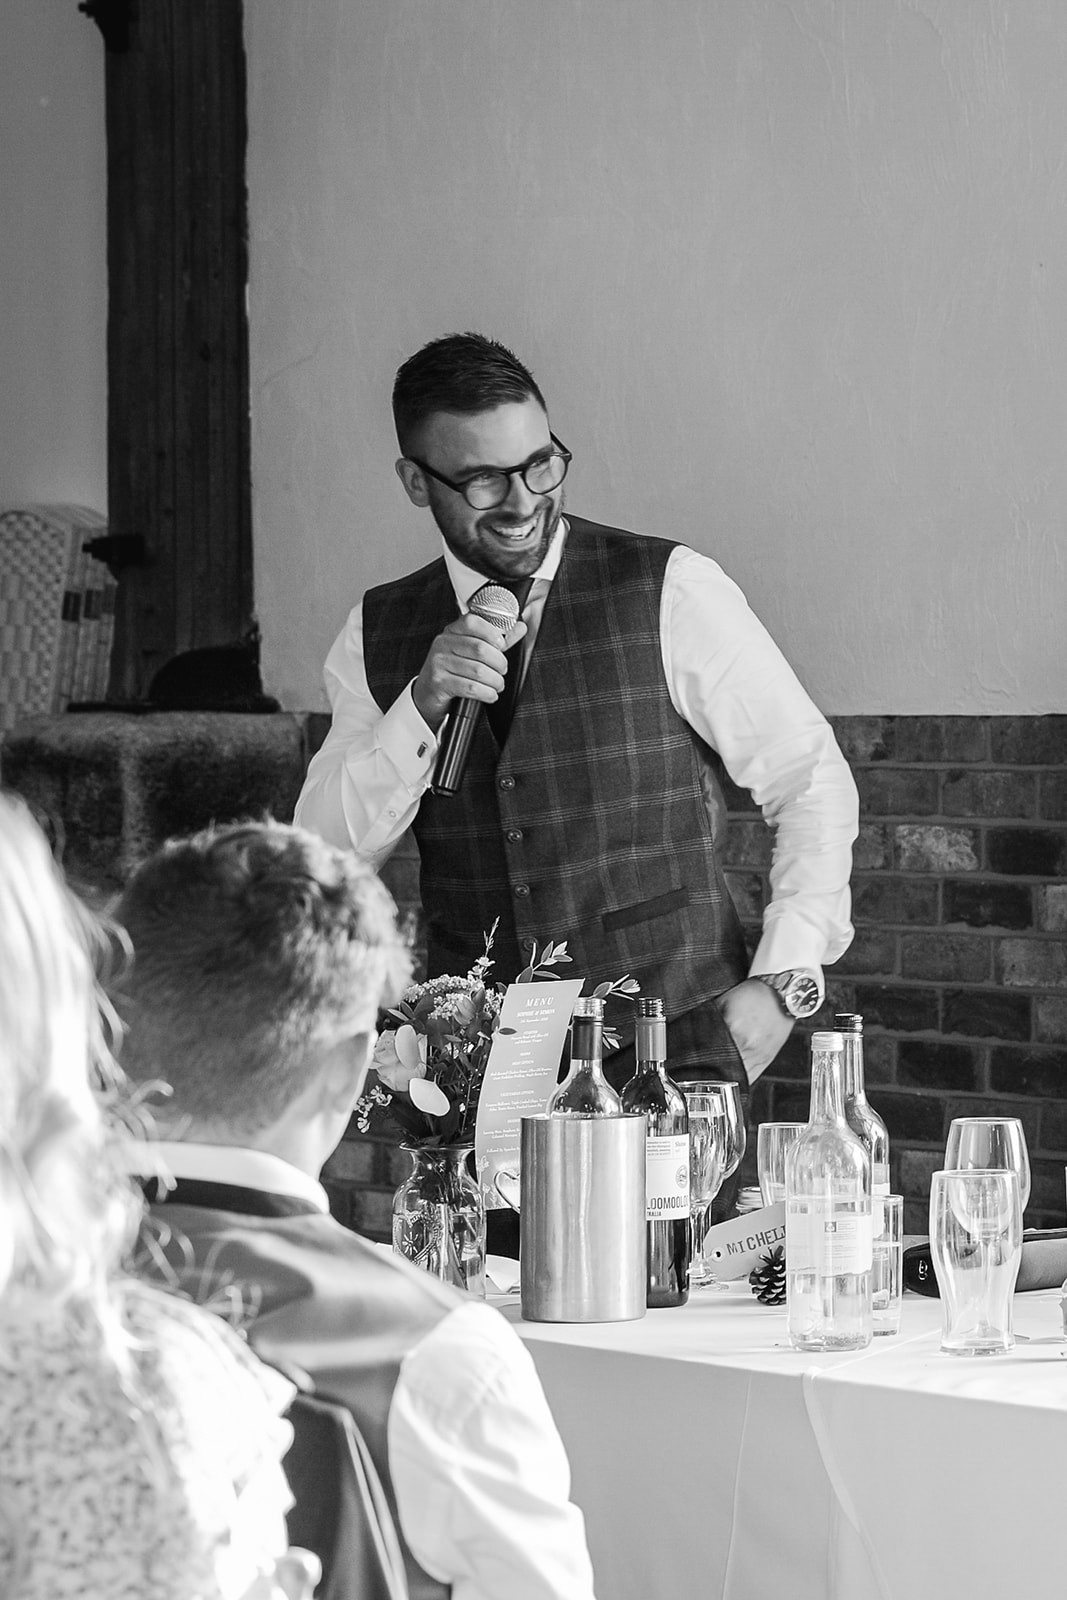 Speeches at a wedding at Long Furlong Barn, Sussex. By OliveJoy Photography